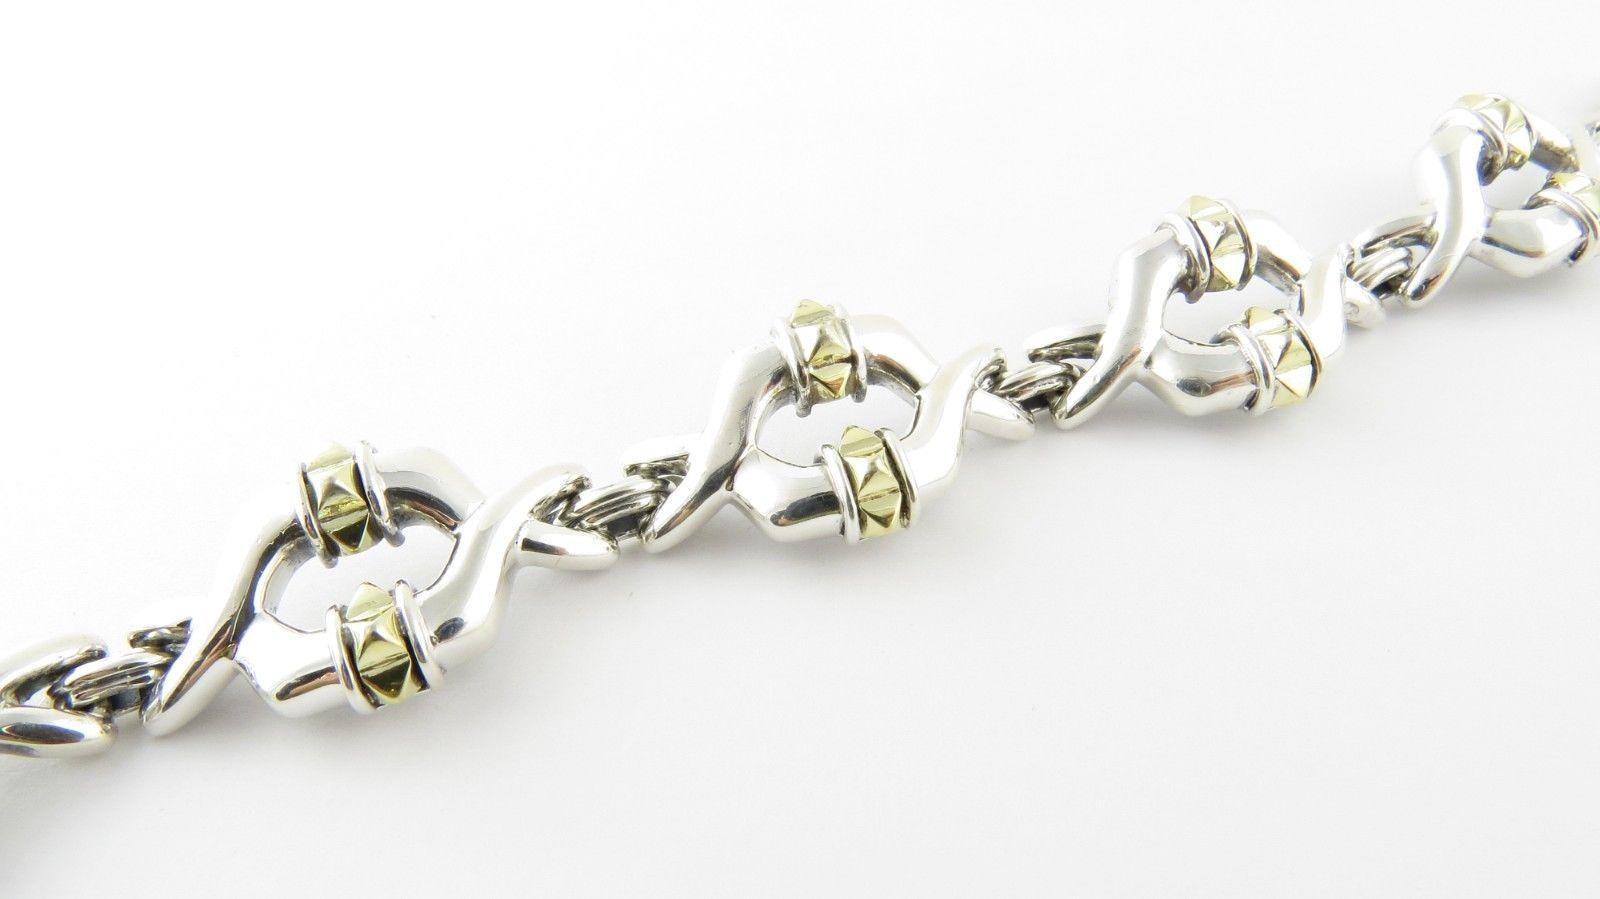 Lagos Caviar Sterling Silver 18K Yellow Gold Link Bracelet

This authentic Caviar bracelet is set in sterling silver and 18K yellow gold

The bracelet is approx. 7.5